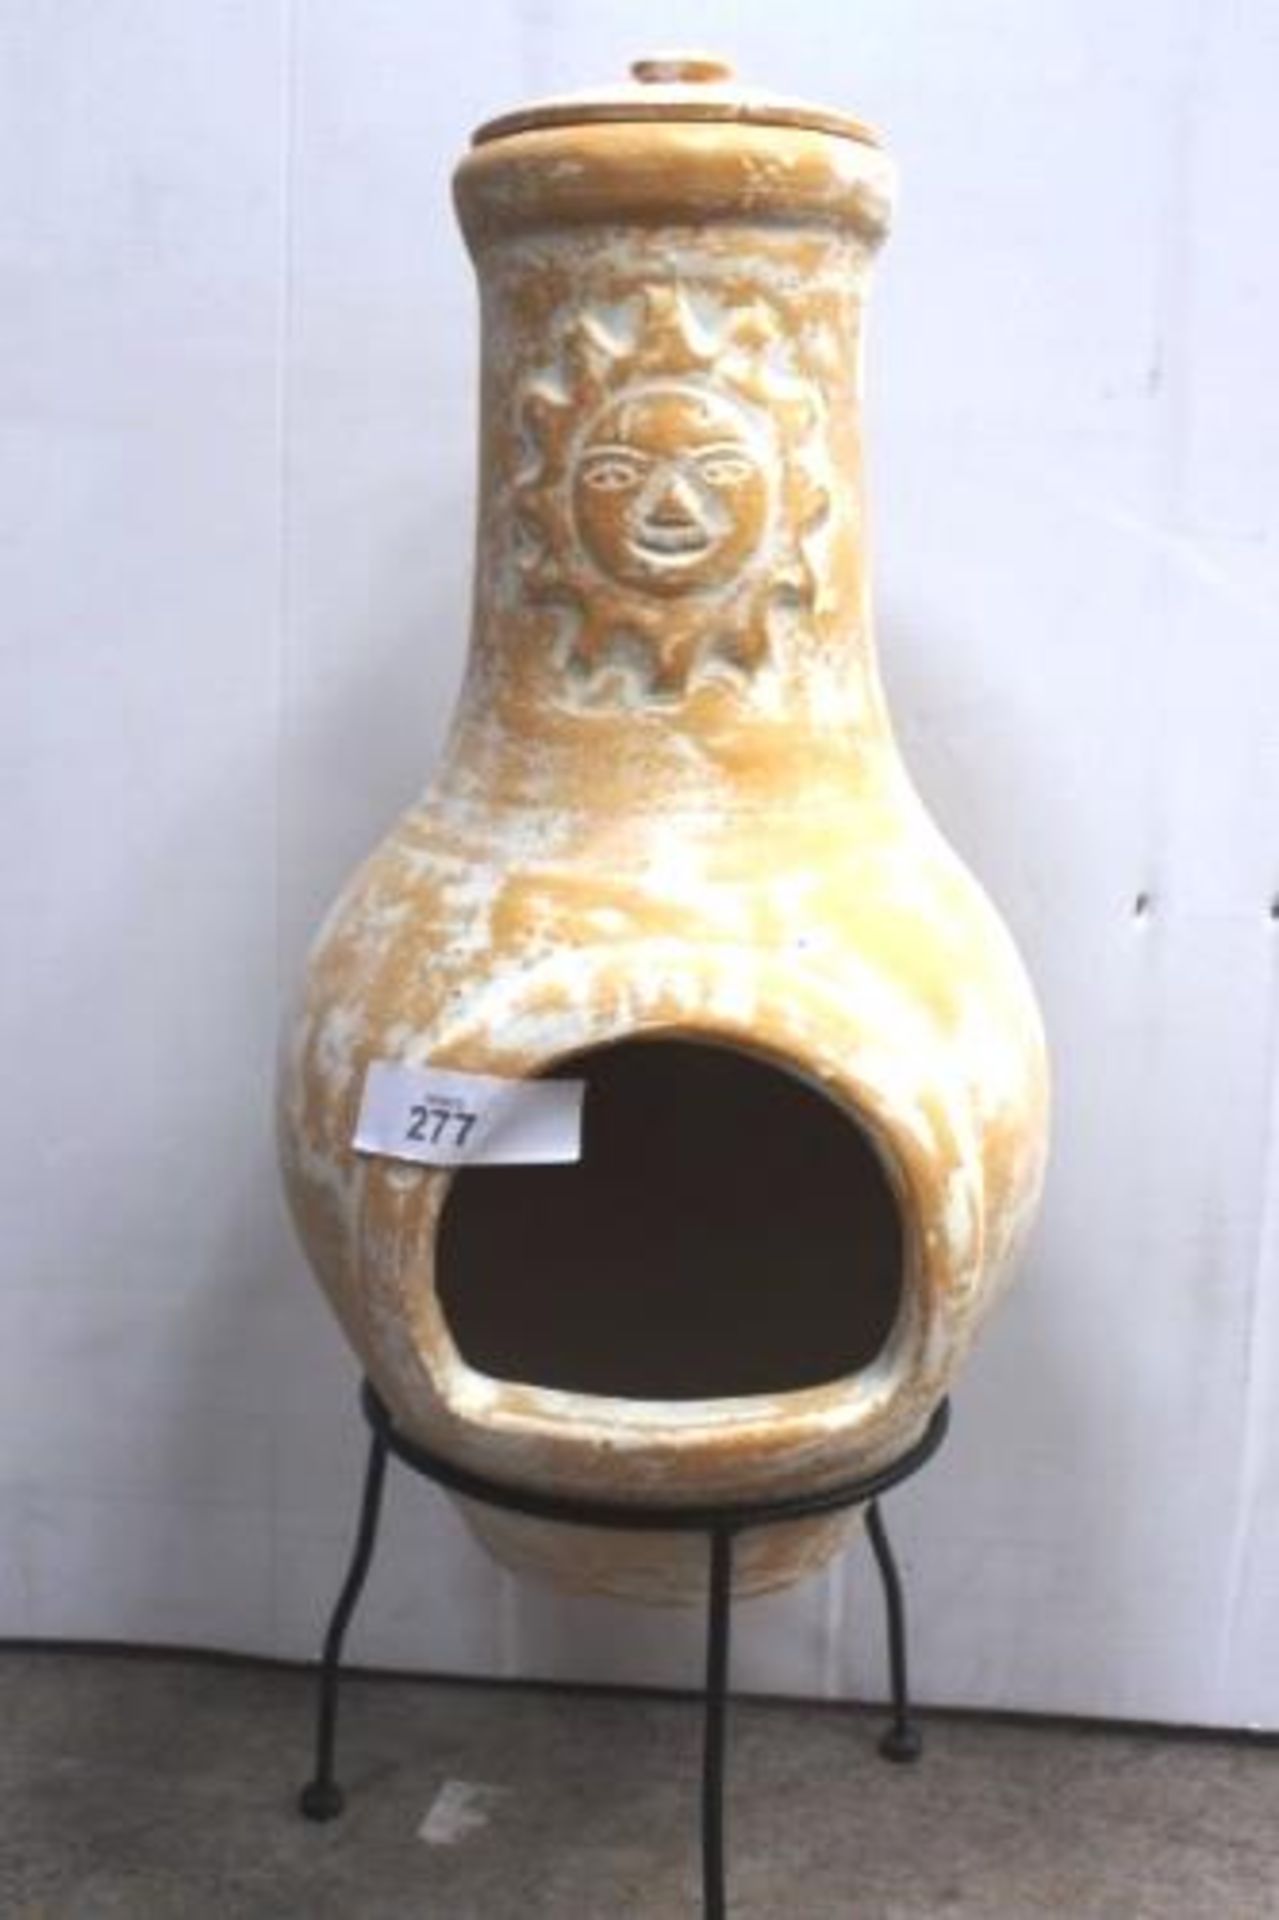 An El Fuego Lolosol 75 clay chimenea with sun decoration, with lid and stand - New (ES17)